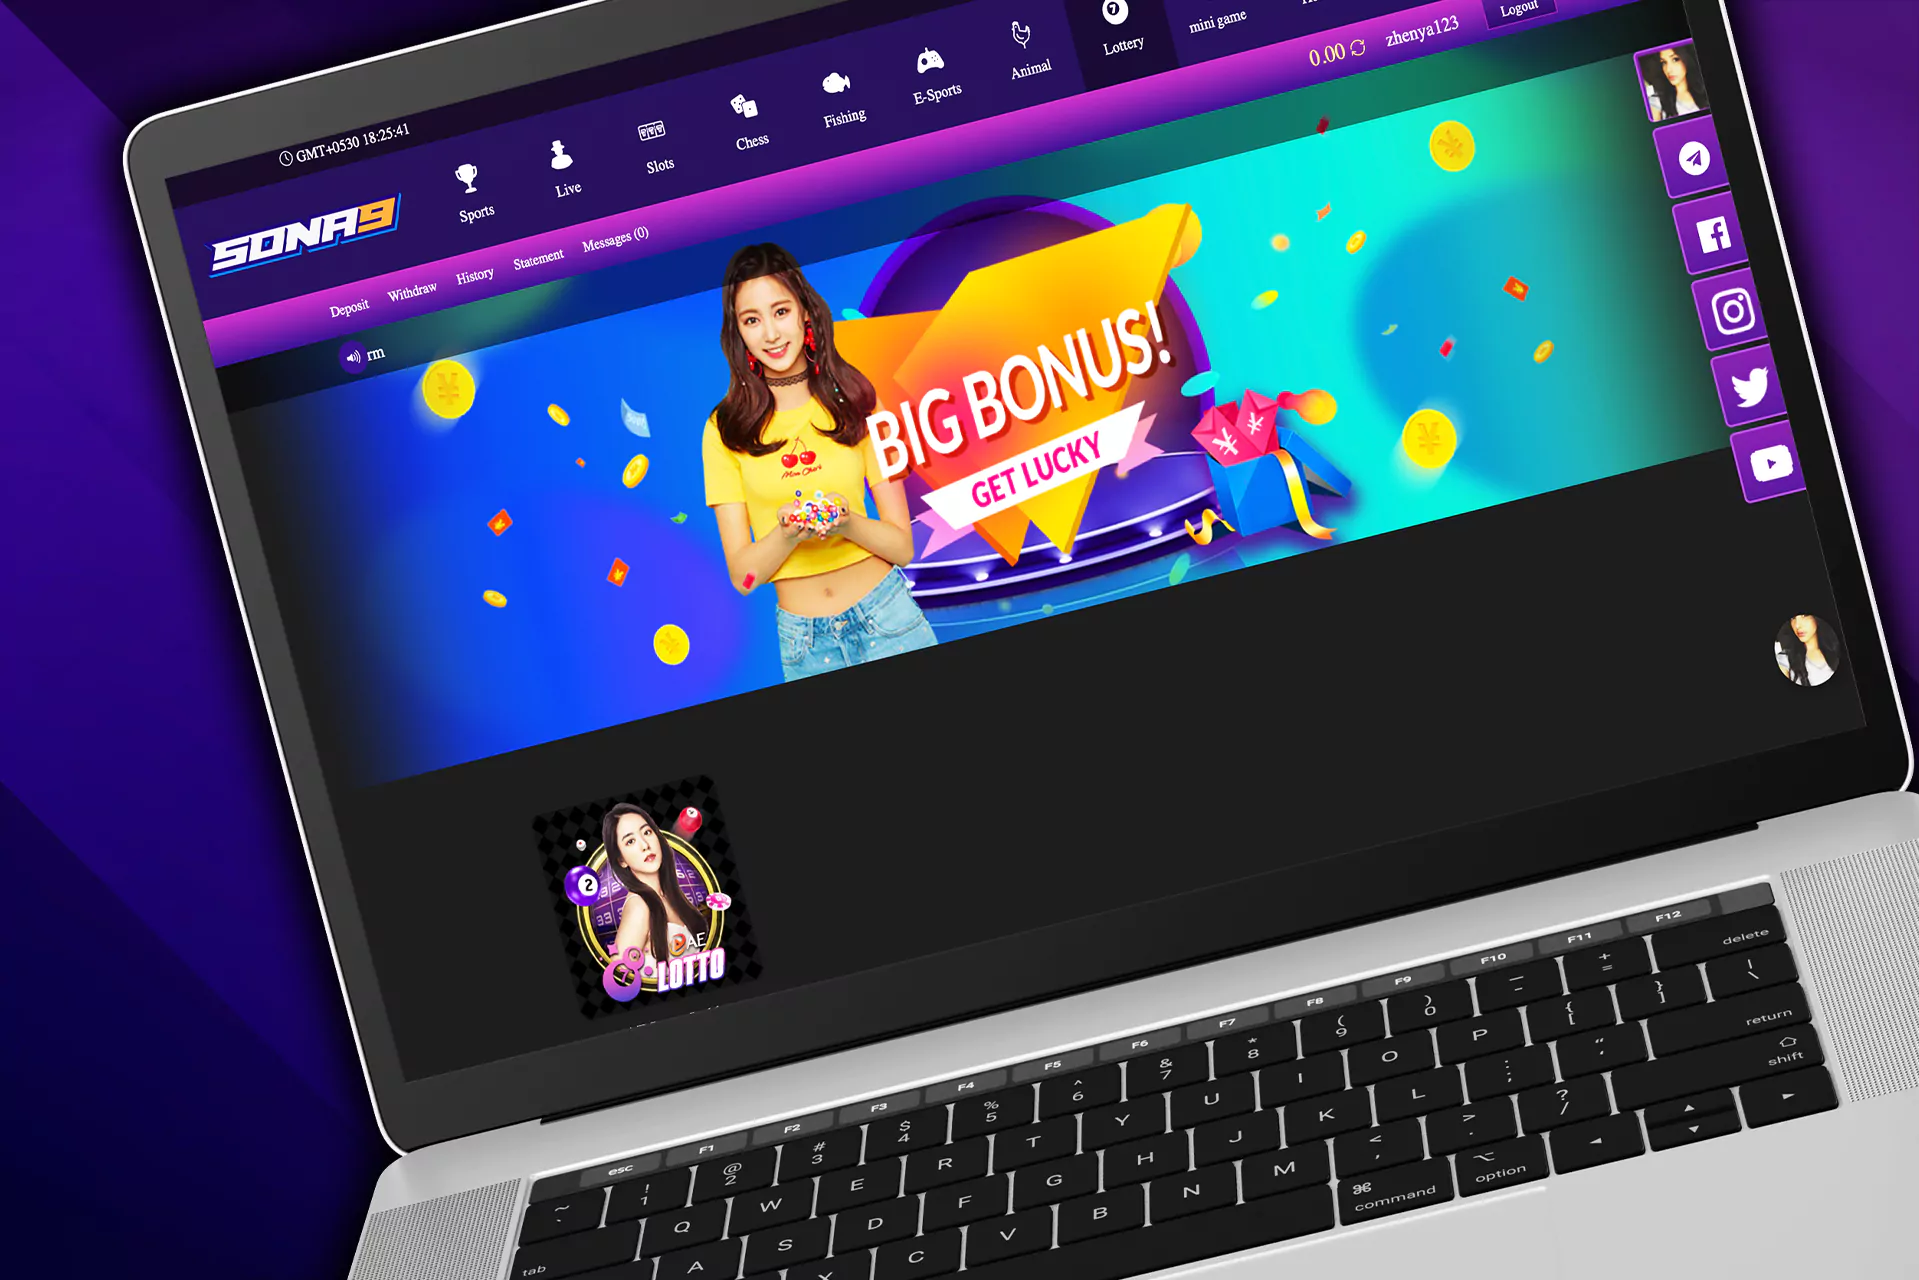 Try to win big prizes in the online lotteries.